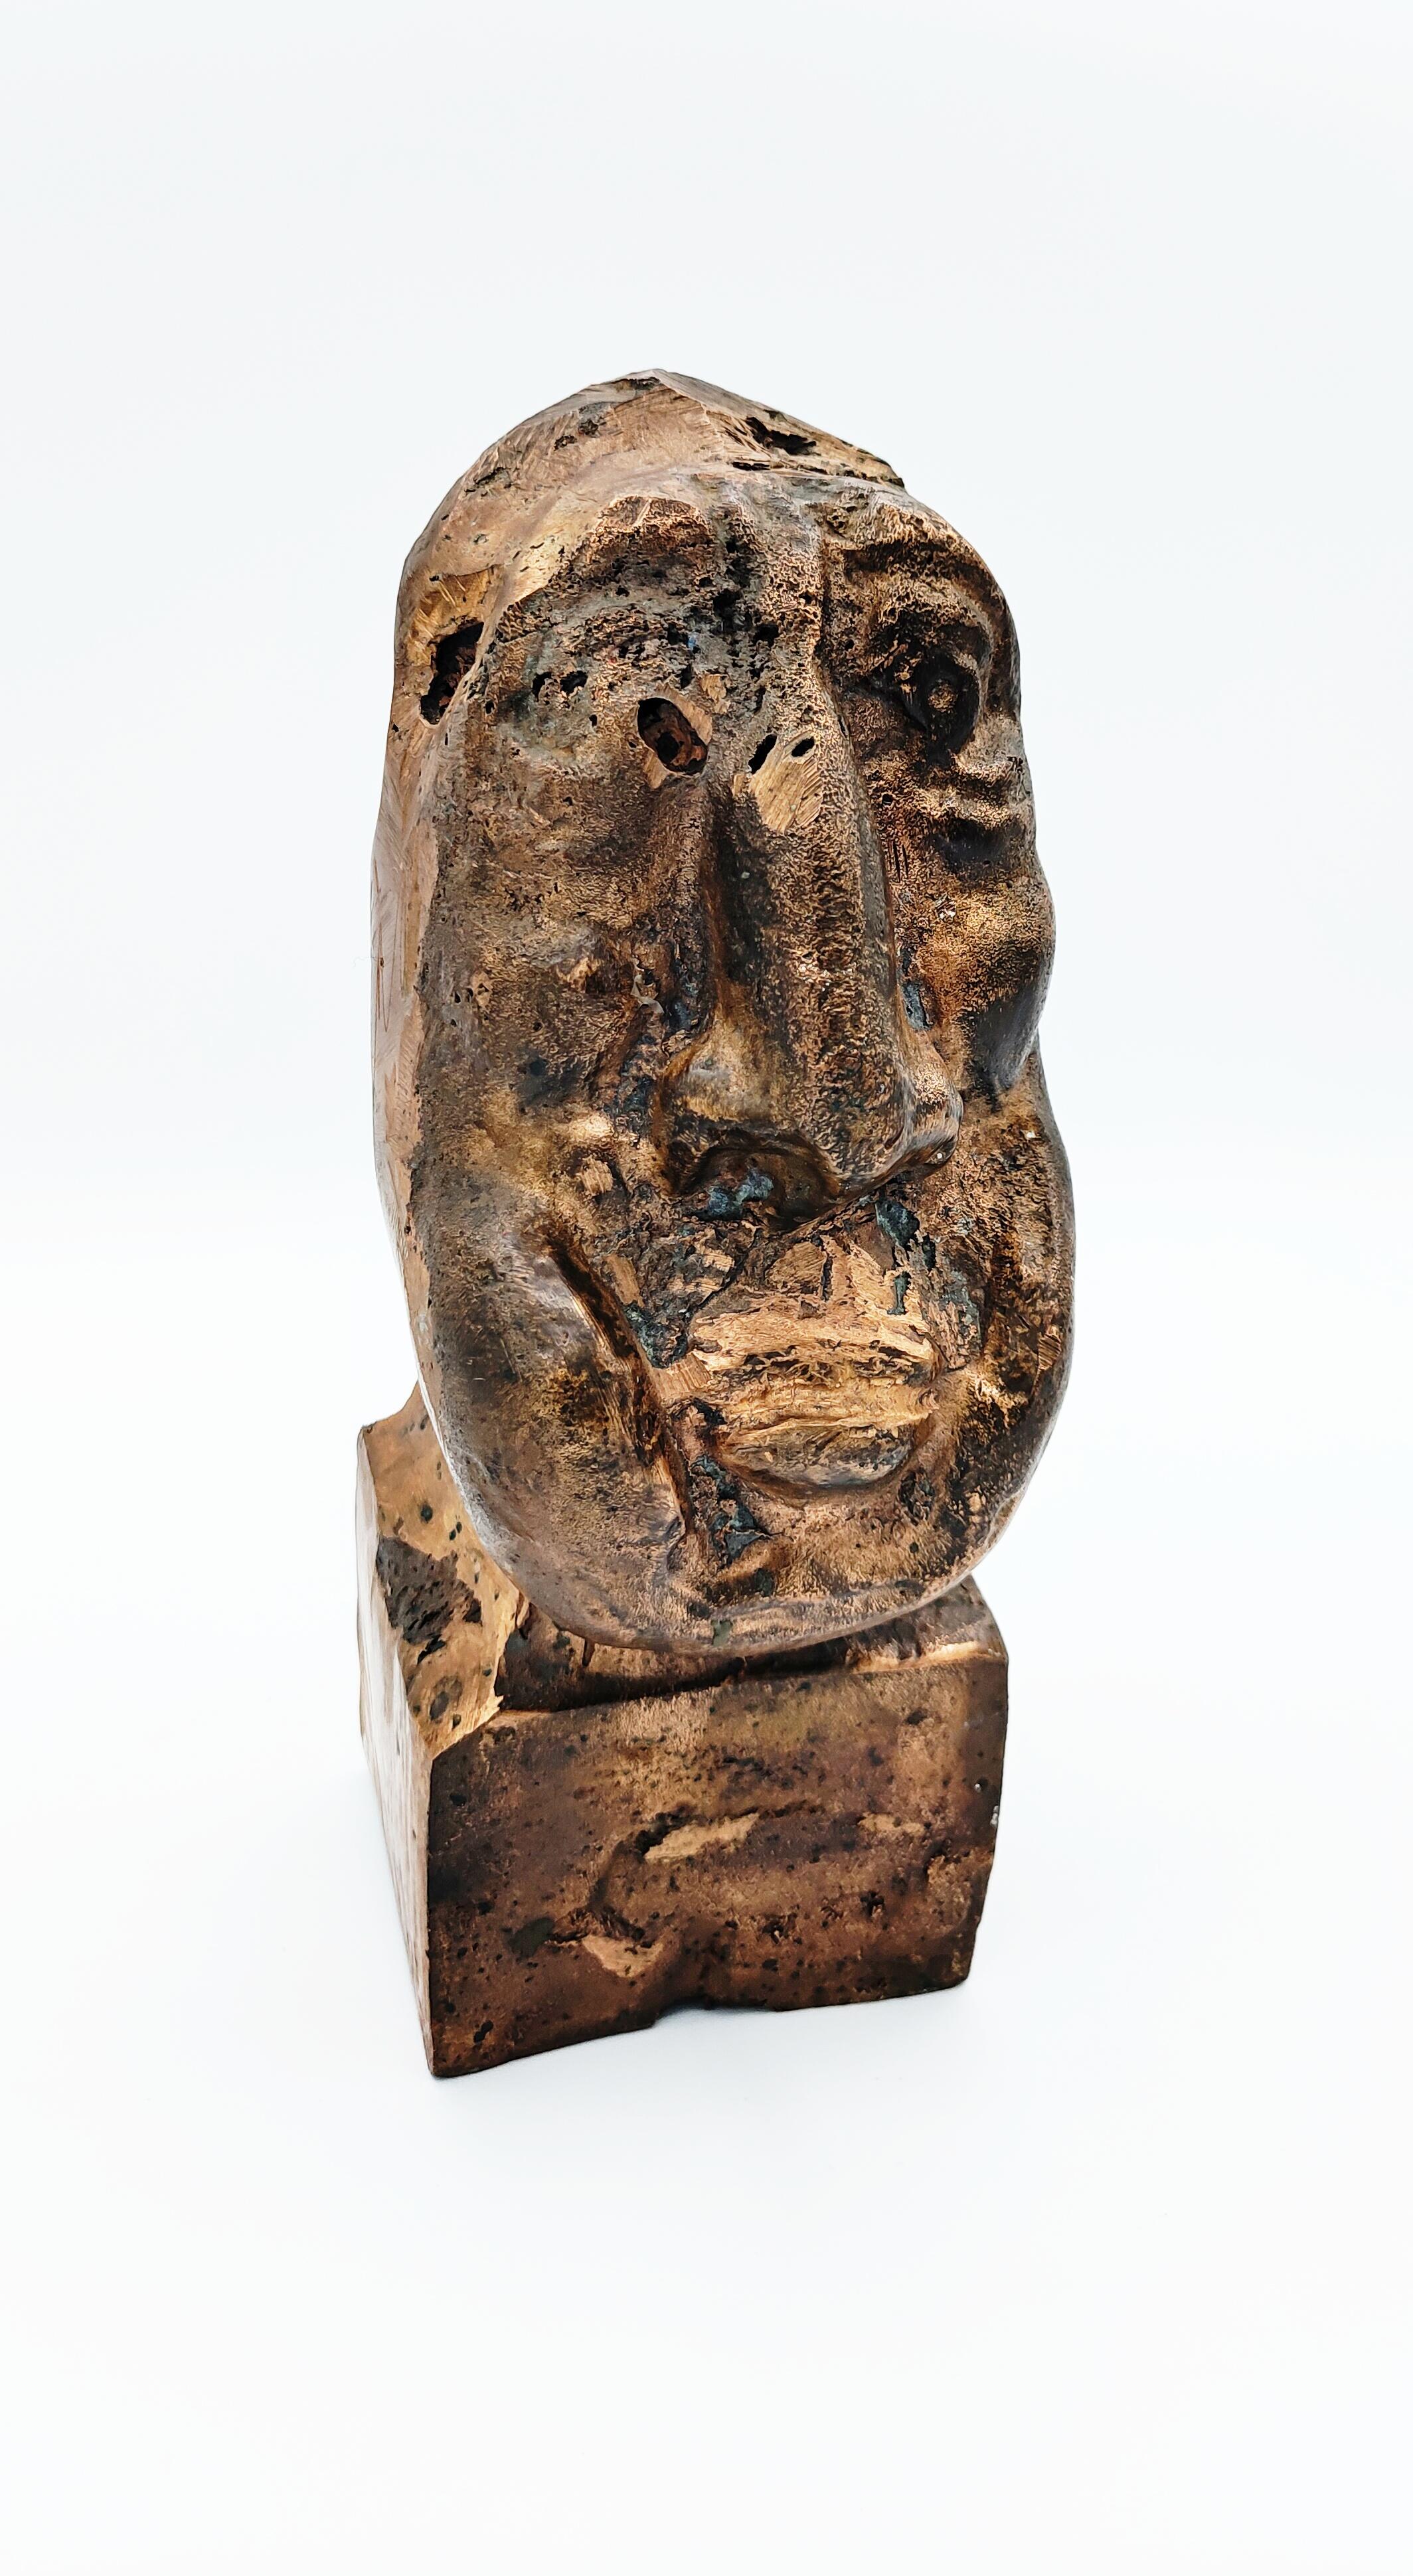 Rare solid bronze head sculpture, 1960s. Incredible work with solid bronze, very heavy, more 18 kg. Very interesting.